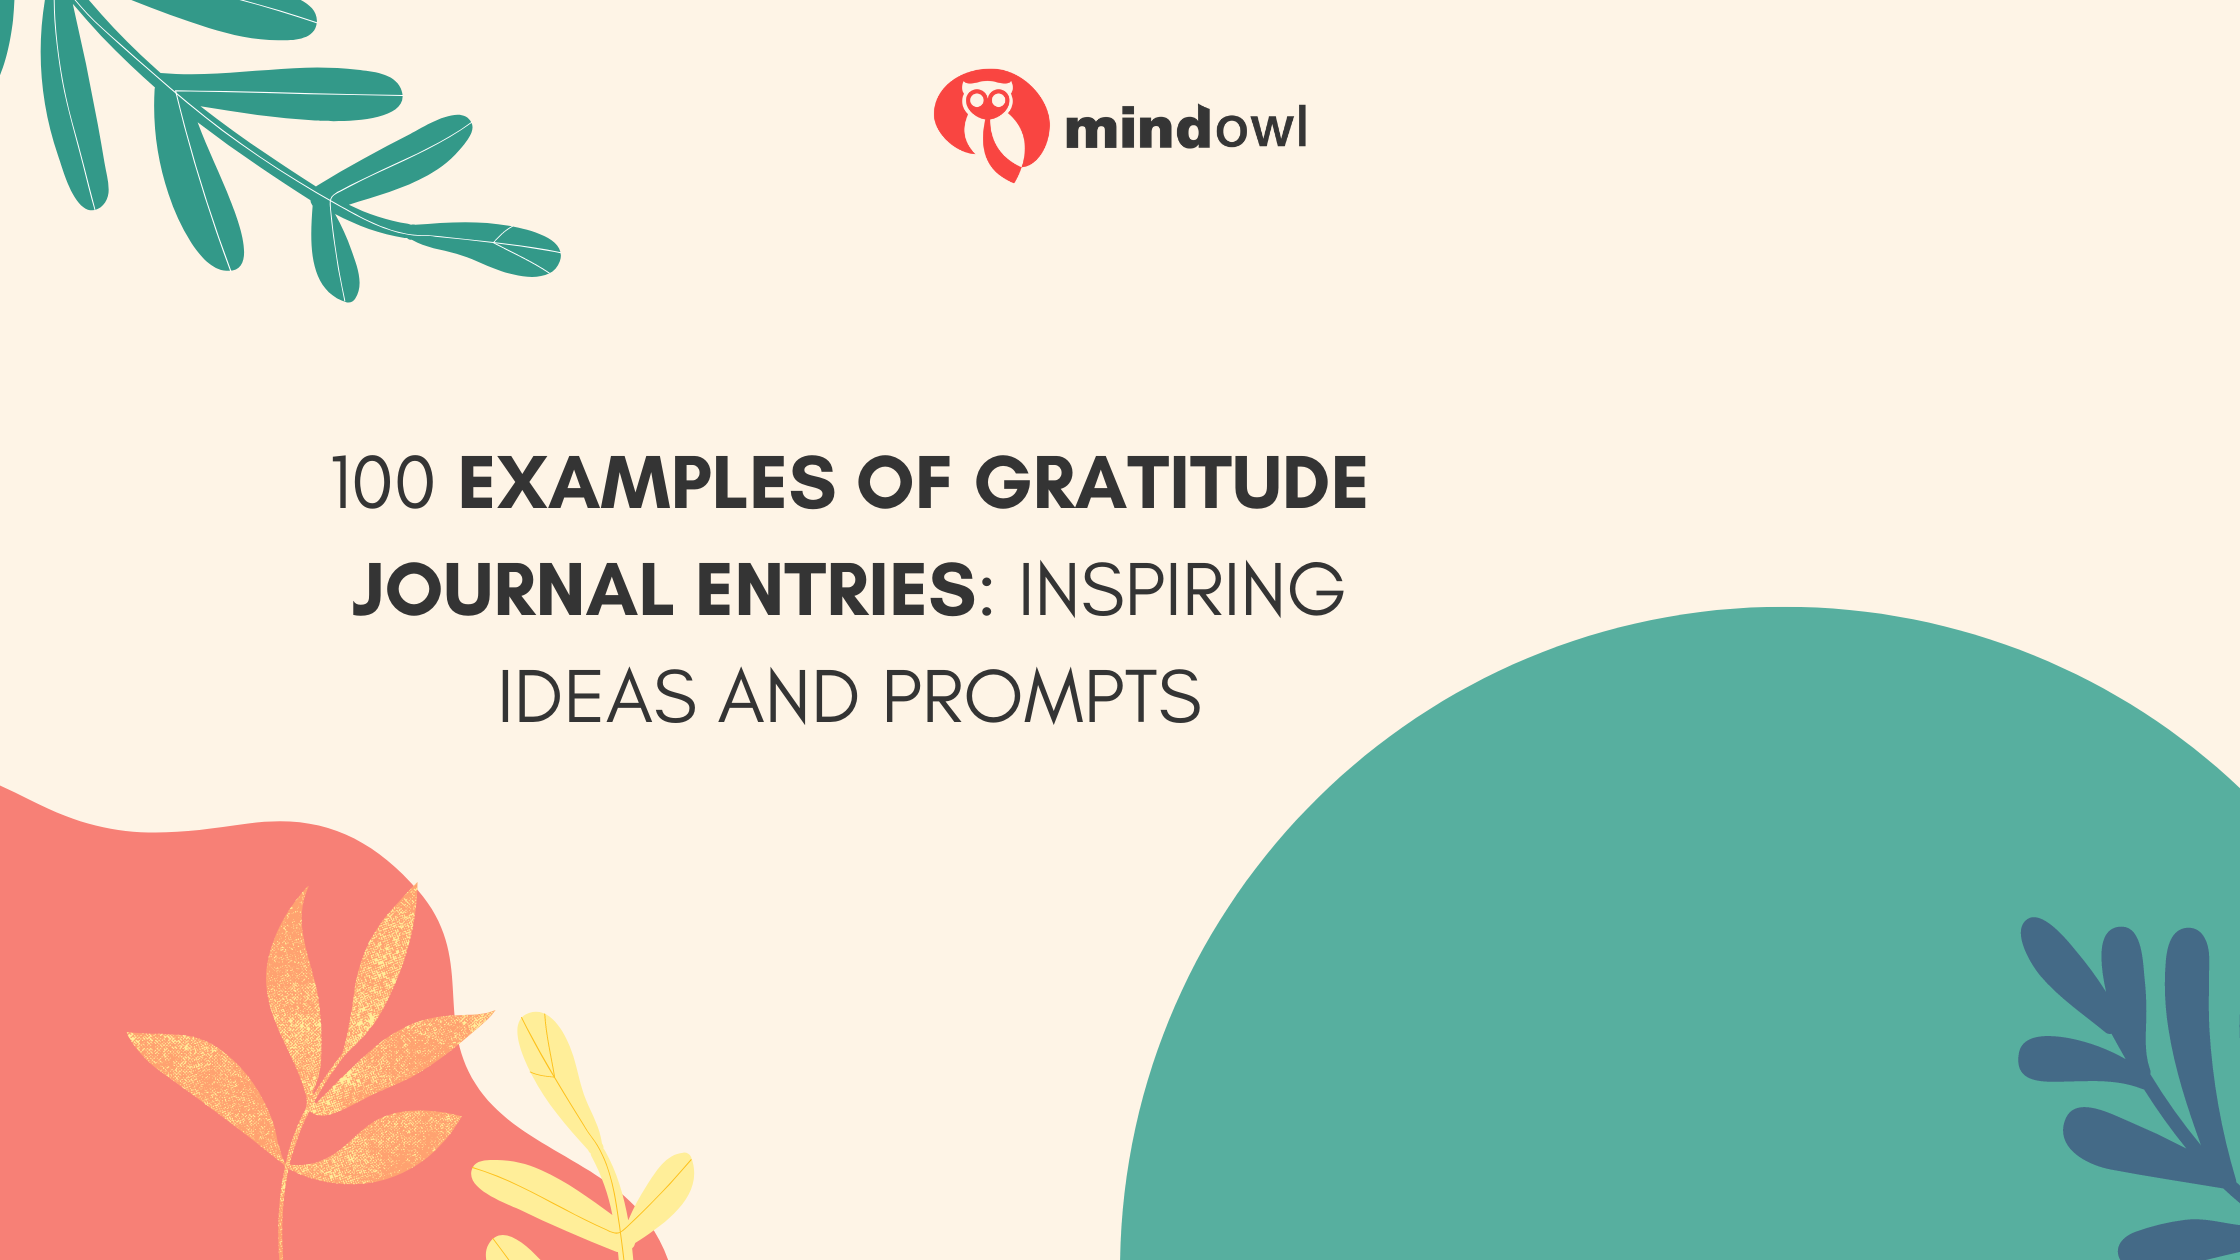 100 Examples Of Gratitude Journal Entries: Inspiring Ideas And Prompts